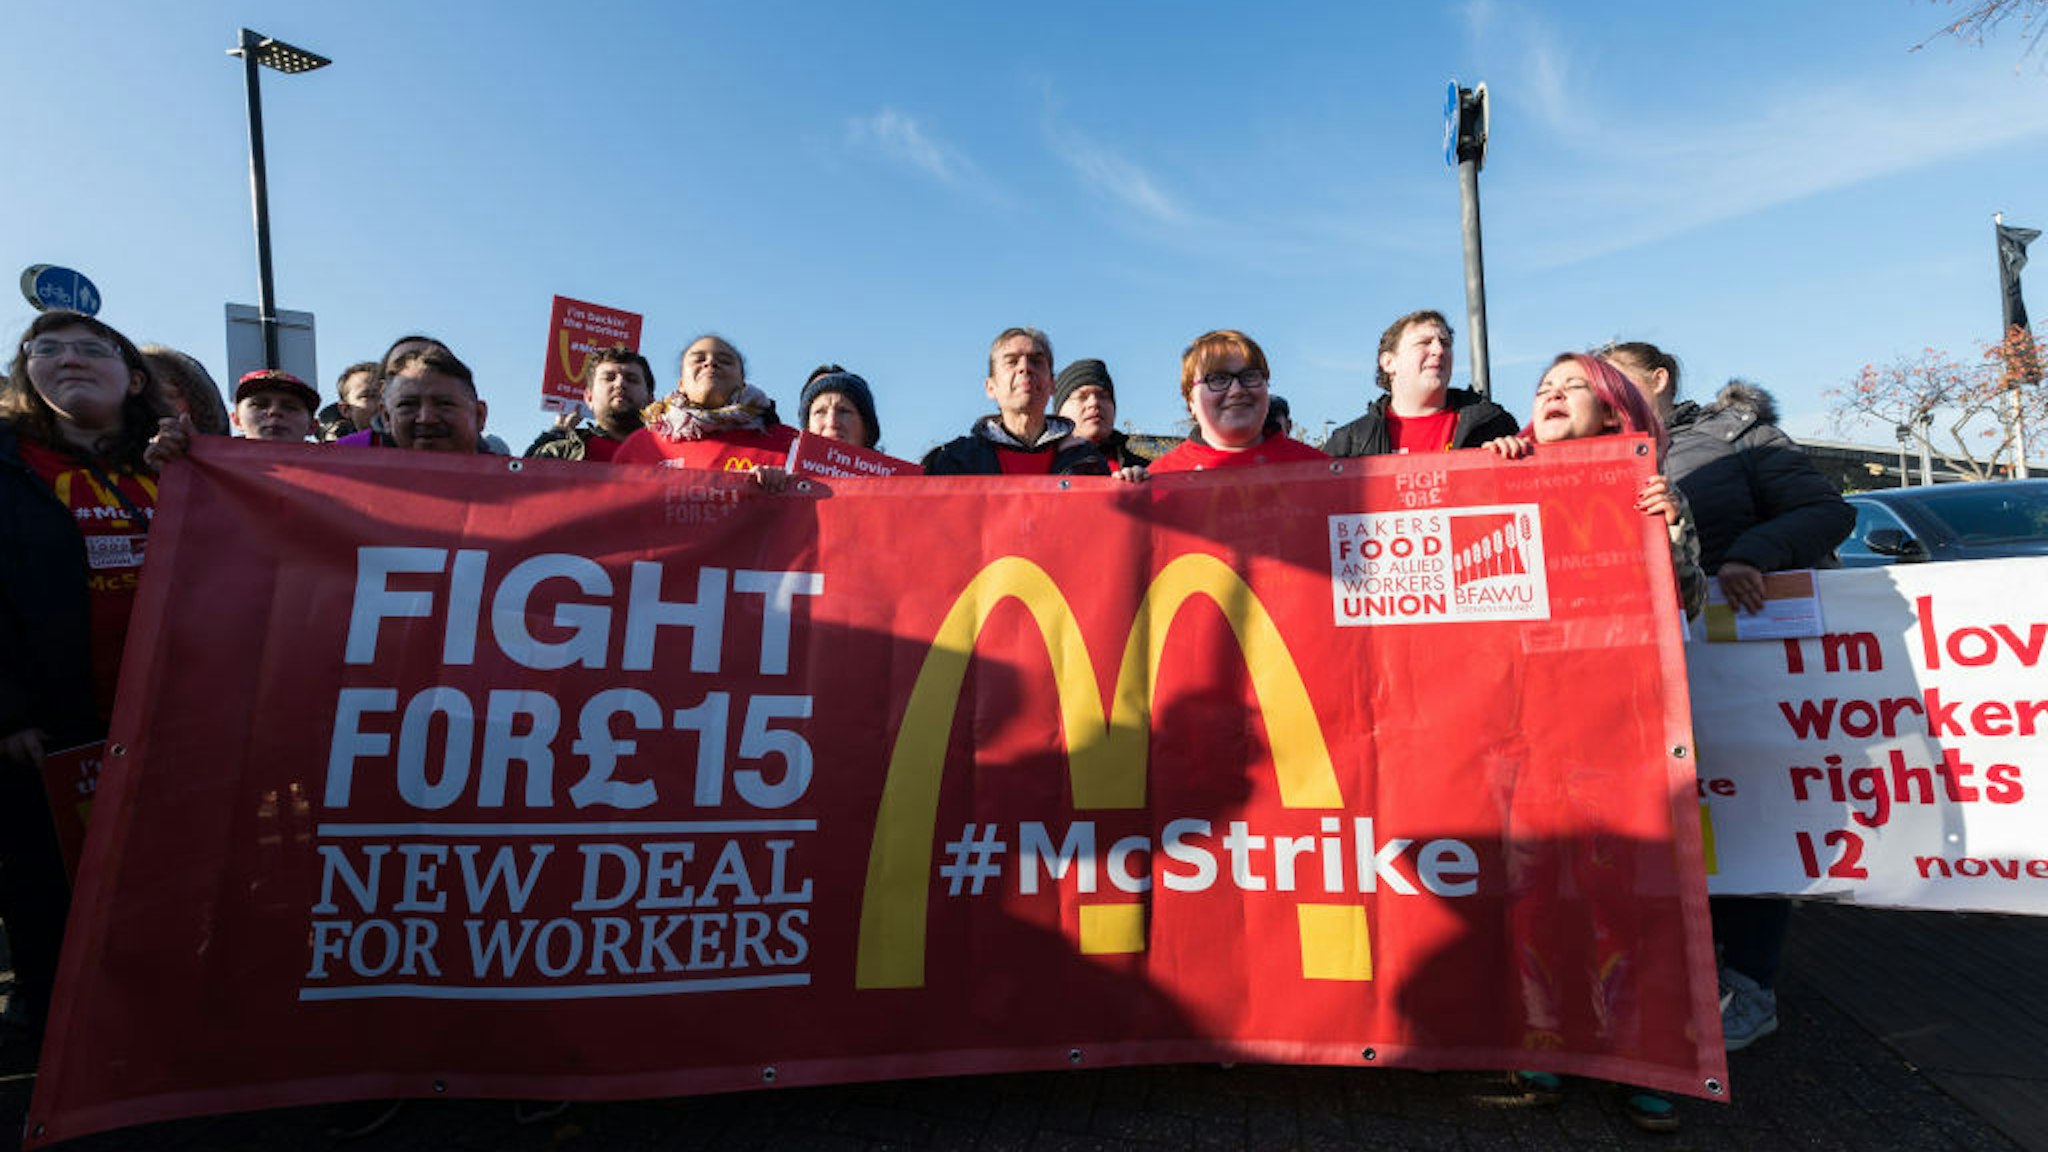 McDonald's employees at Wandsworth branch stage a walkout demanding £15 an hour minimum wage, union recognition, choice of guaranteed working hours and abolition of zero hour contracts as part of coordinated strike action by workers of six London McDonald's stores on 12 November, 2019 in Lodnon, England.